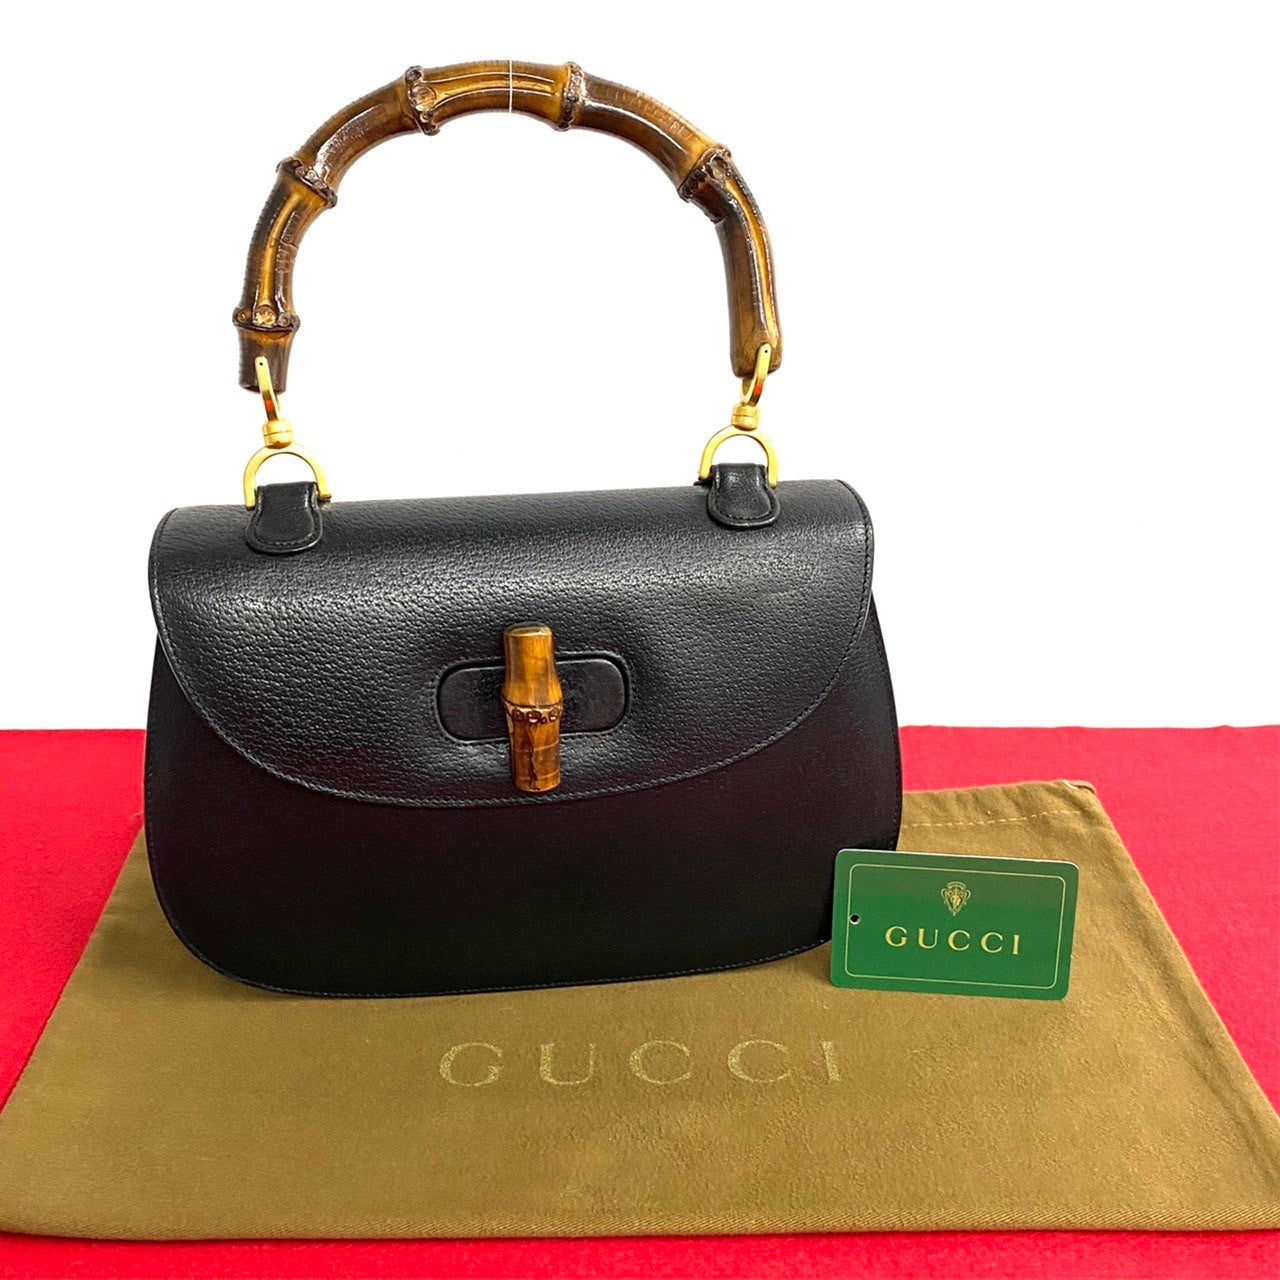 Gucci Bamboo Flap Top Handle Bag  Leather Handbag in Excellent condition